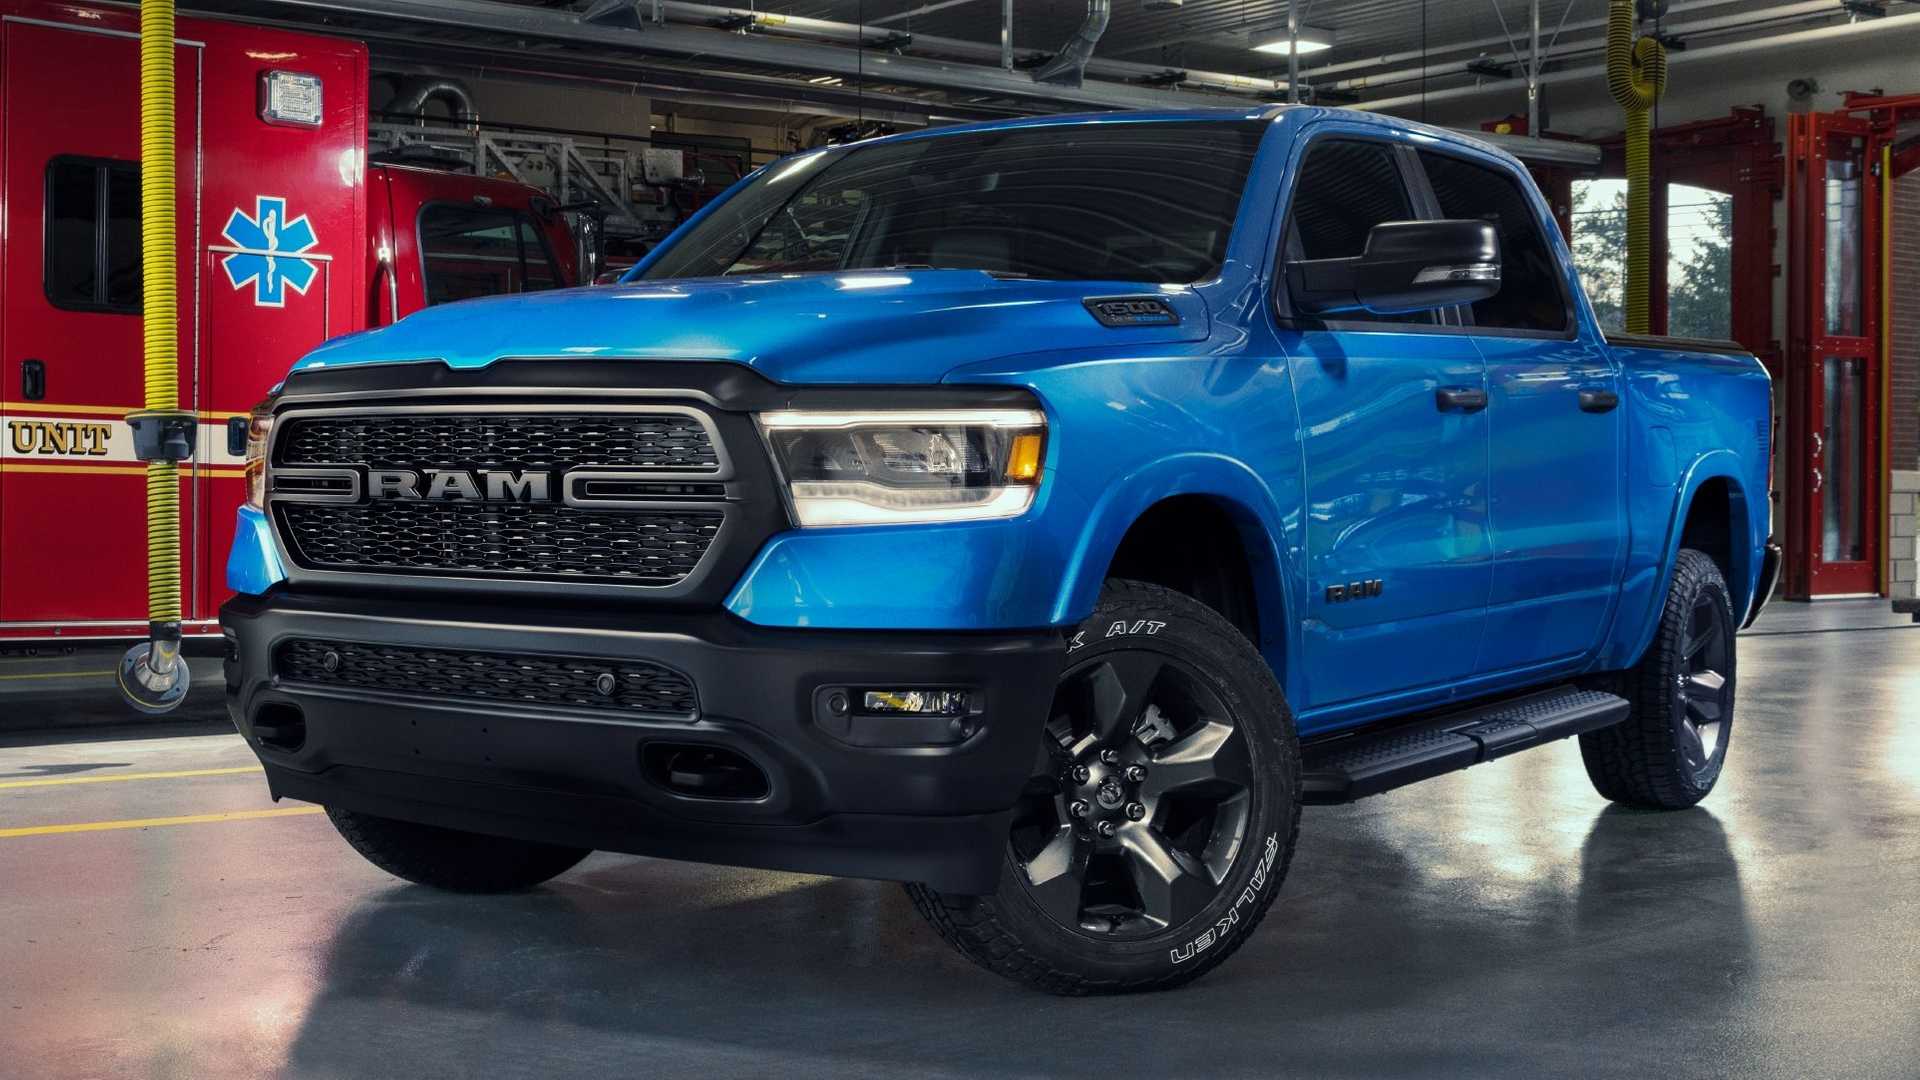 2023 Ram 1500 Built To Serve EMS Edition Is A Nod To First Responders